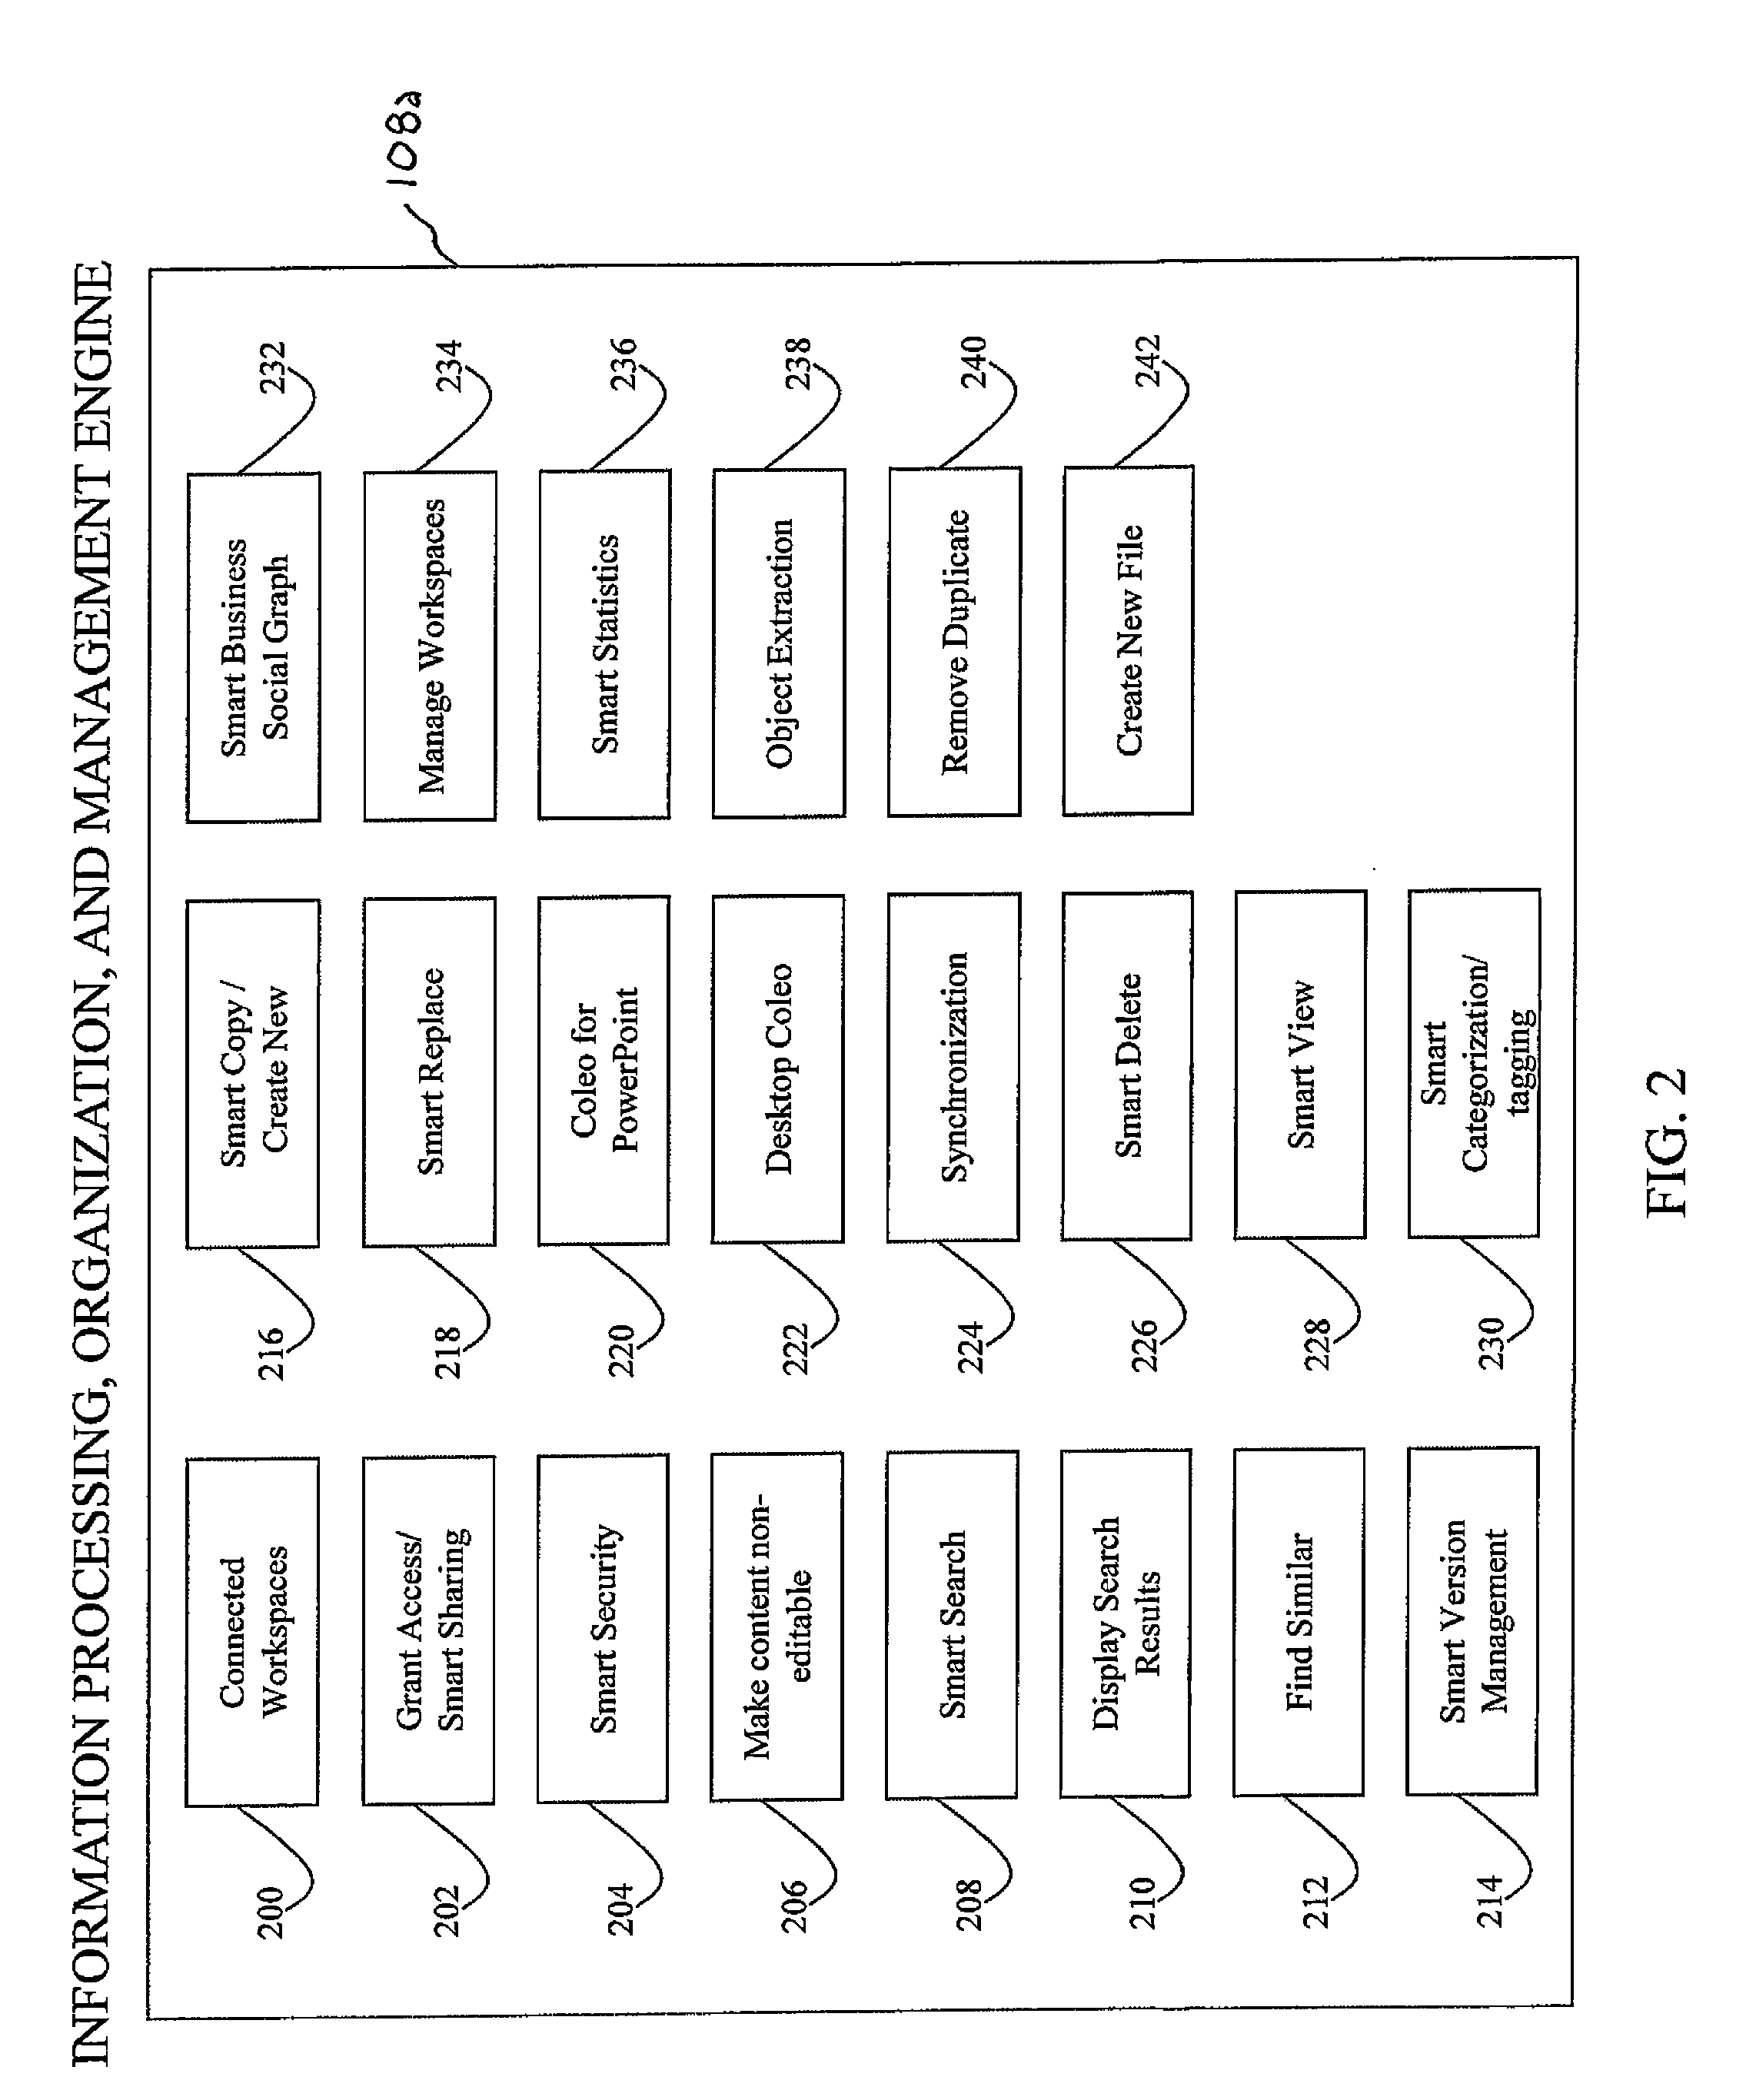 Information organization, management, and processing system and methods